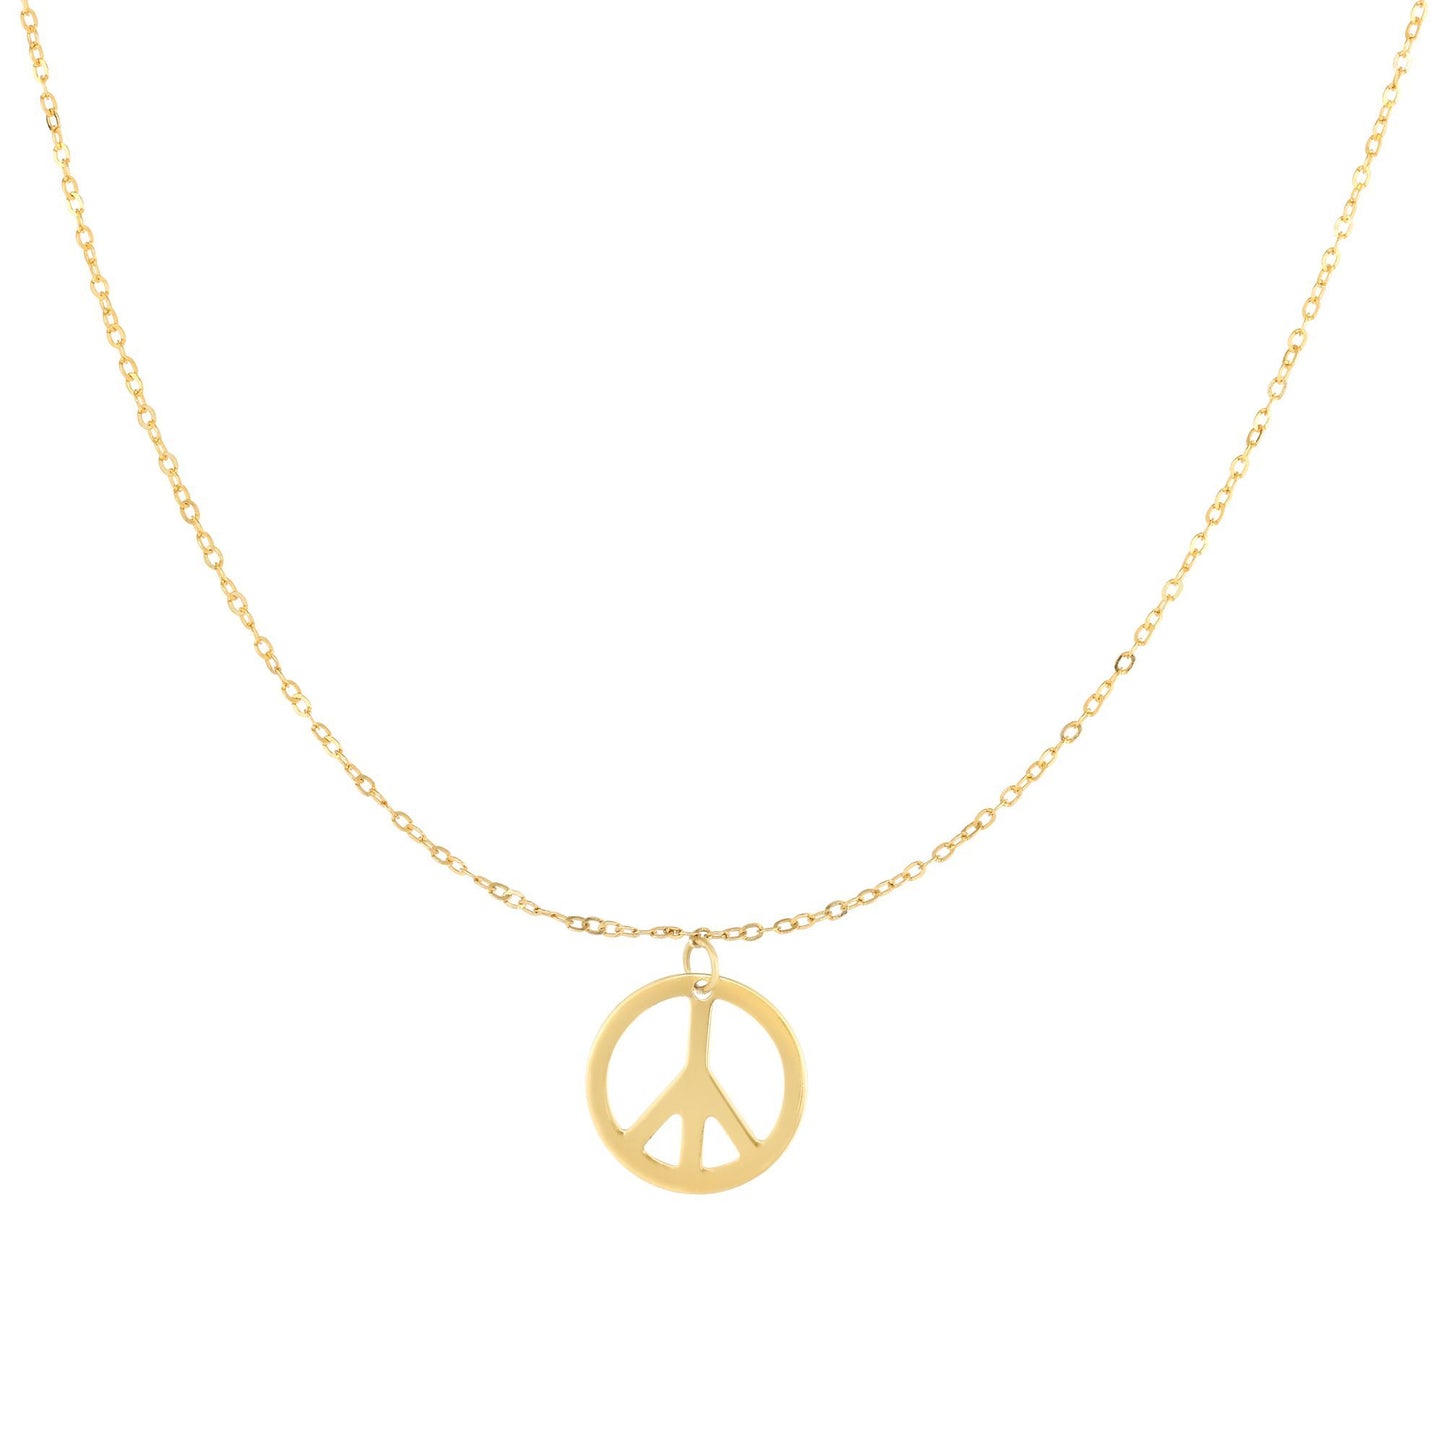 14K Gold Polished Peace Sign Charm Pendant Necklace